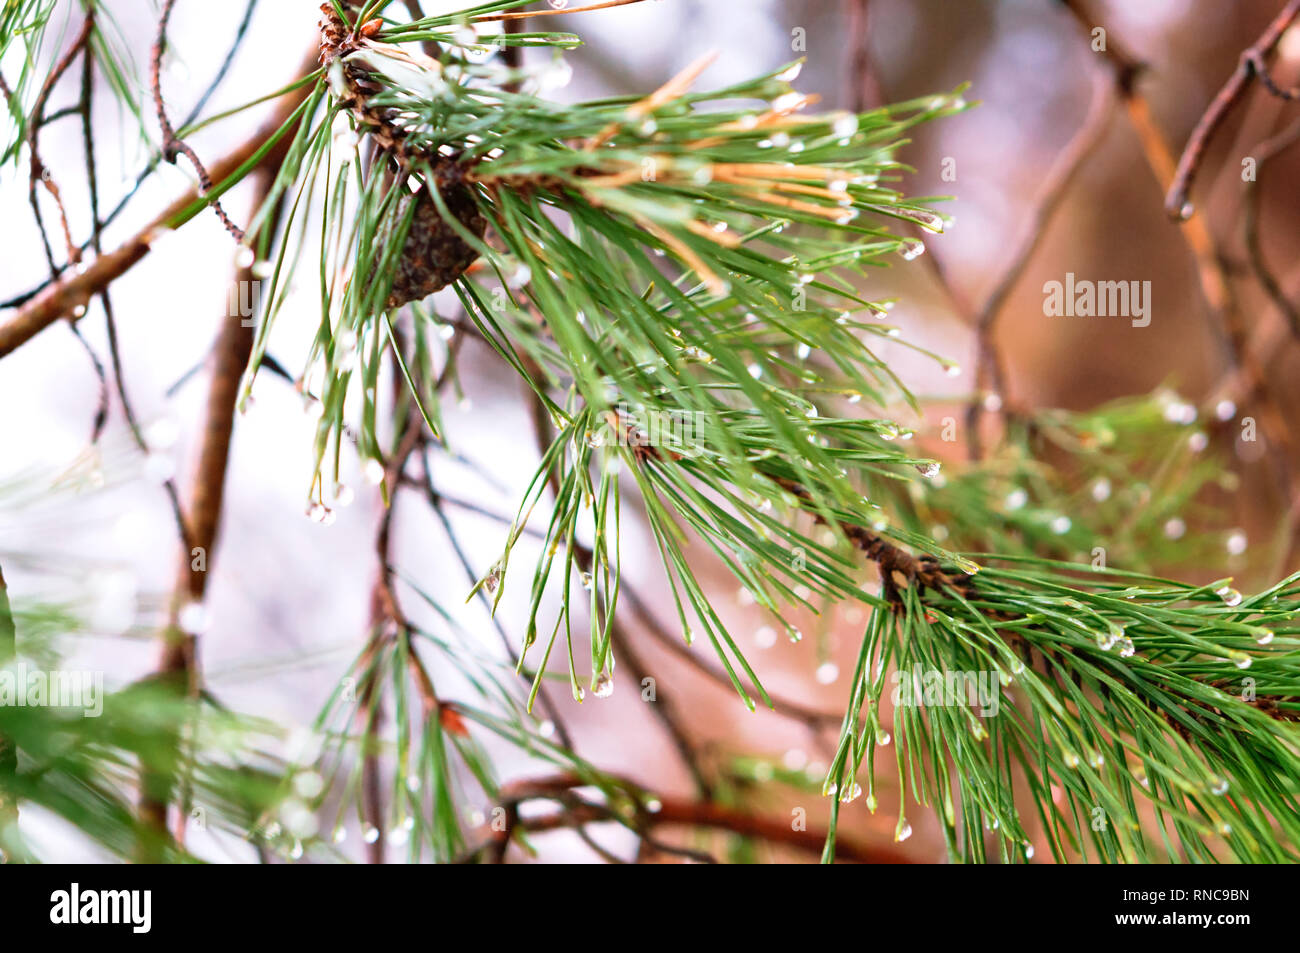 fir branches with cones, rain drops on fir needles Stock Photo